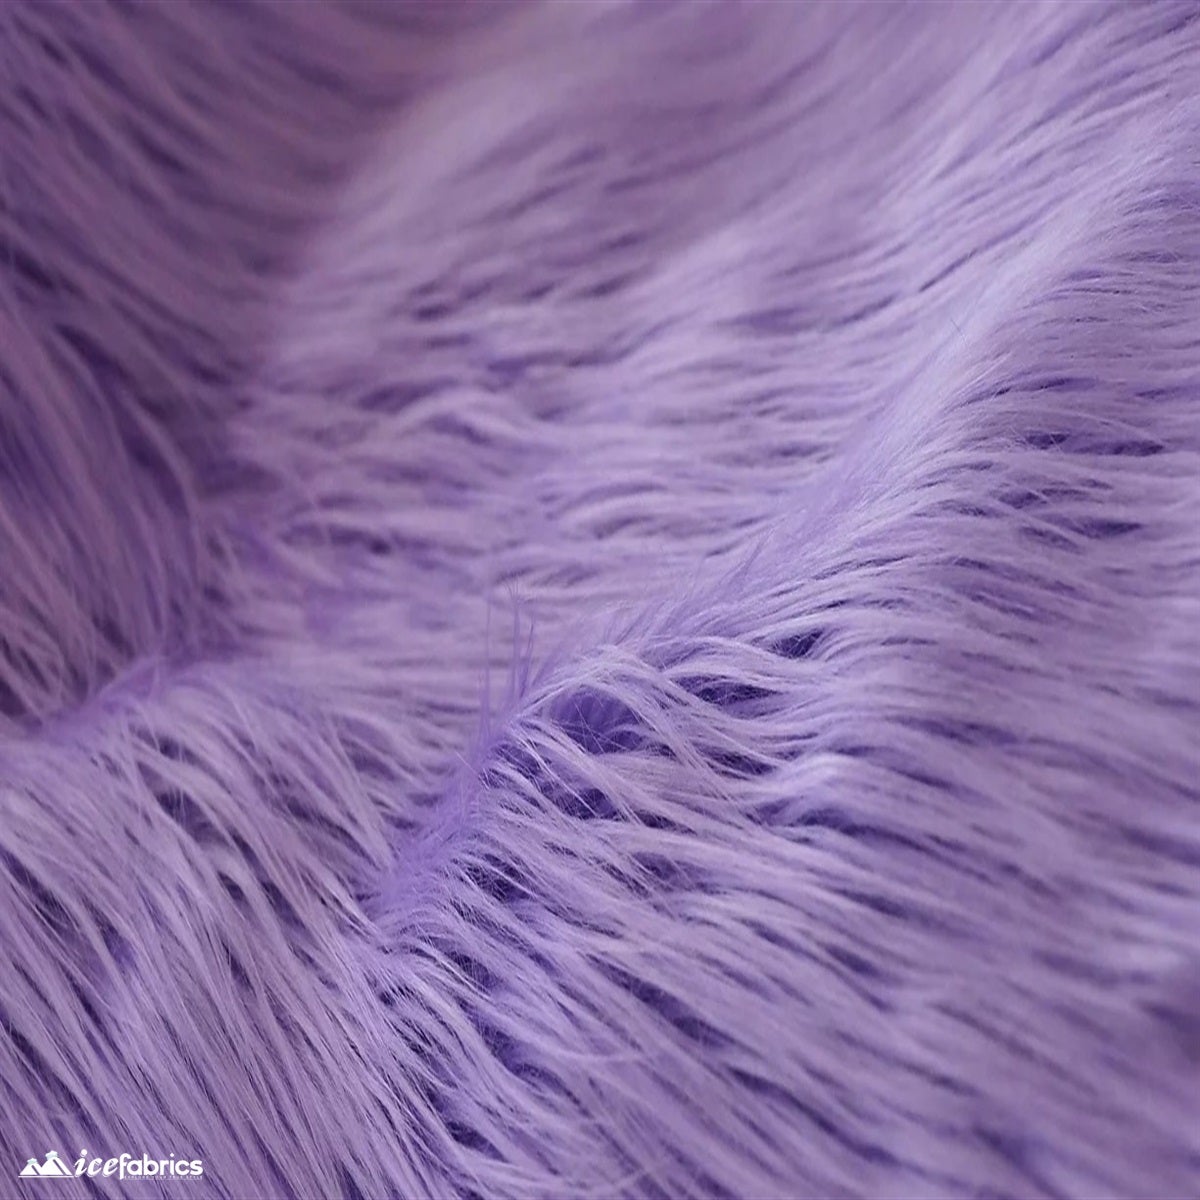 Mohair Faux Fur Fabric By The Roll (20 Yards) 4 Inch PileICE FABRICSICE FABRICSLilacBy The Roll (60" Wide)Mohair Faux Fur Fabric By The Roll (20 Yards) 4 Inch Pile ICE FABRICS